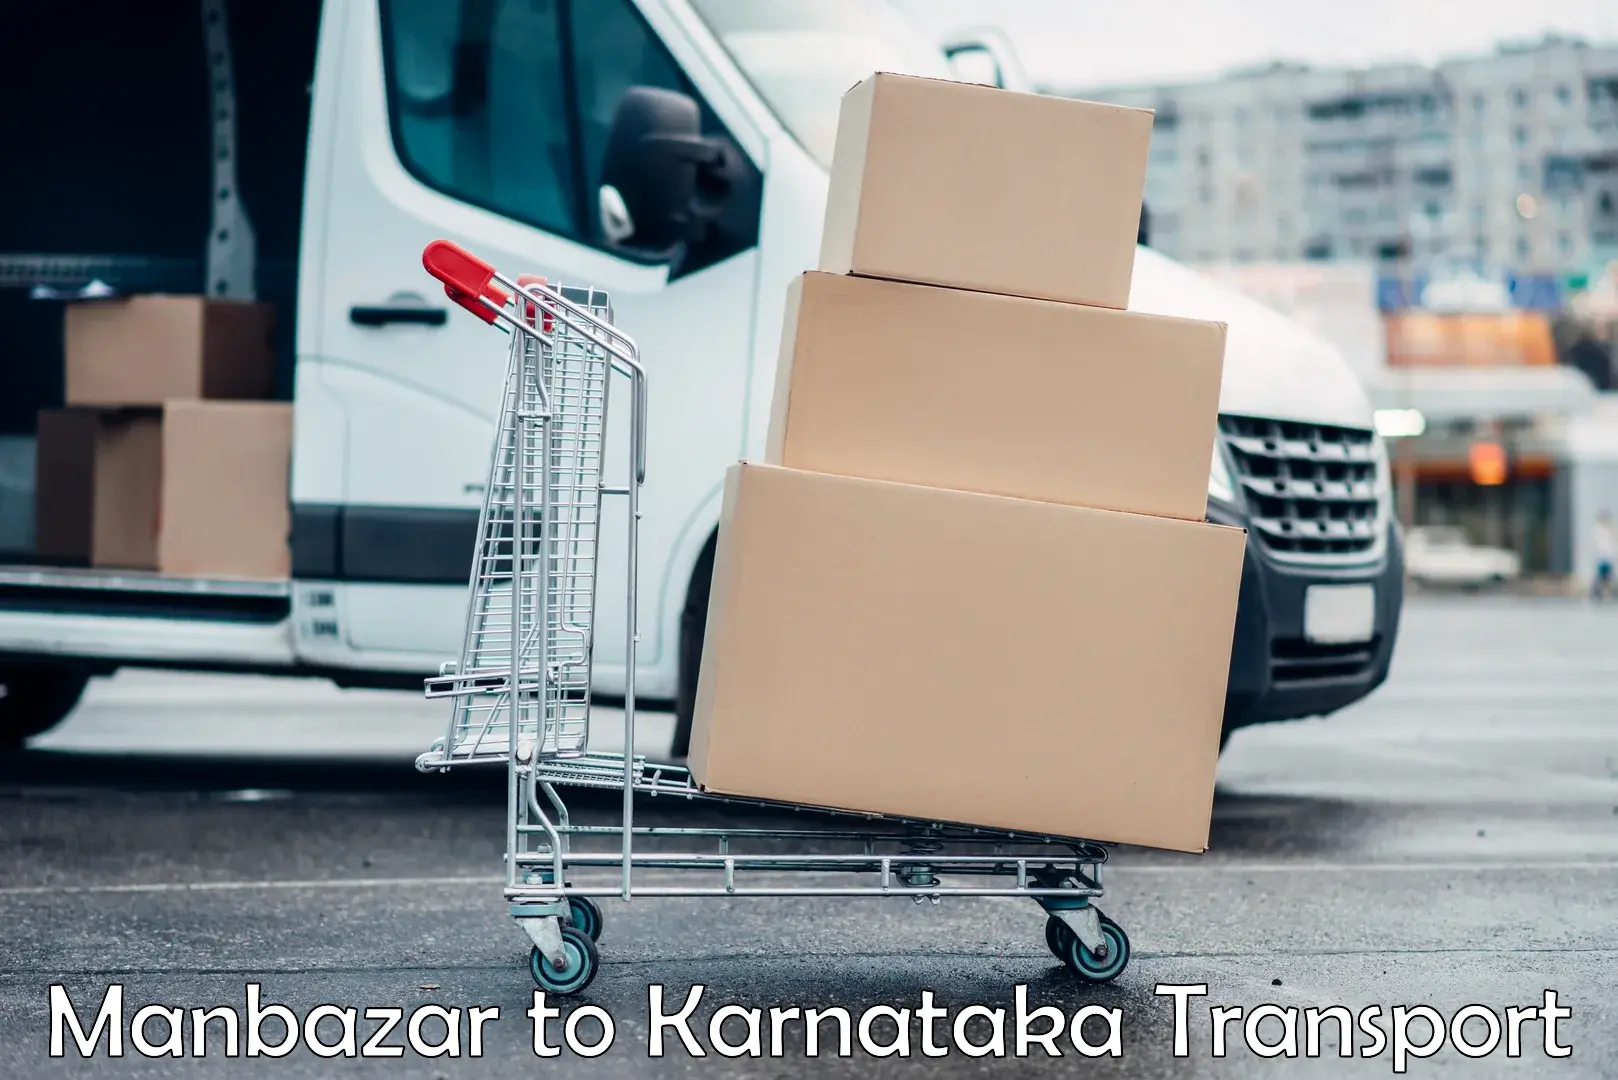 Goods delivery service Manbazar to Manipal